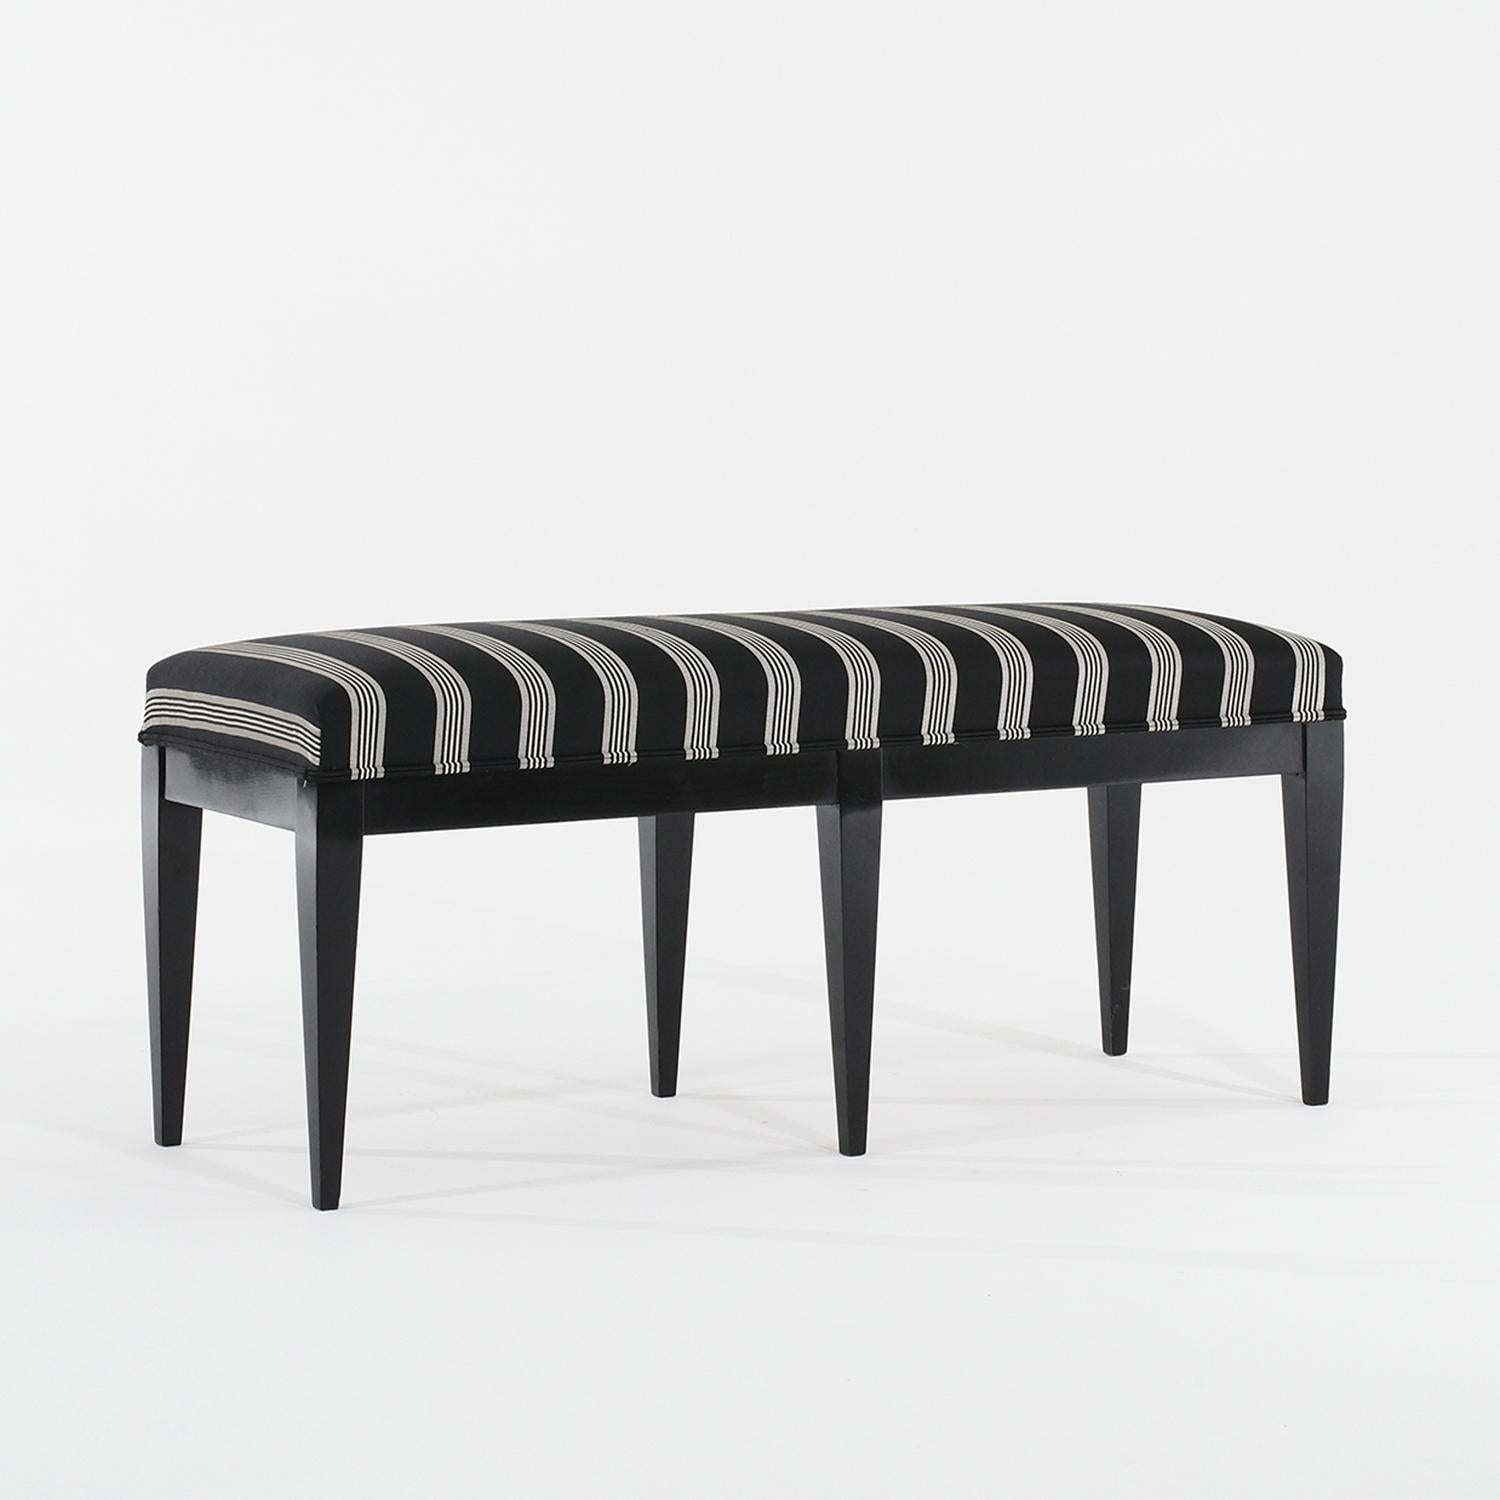 20th Century Black Italian Neoclassical Style Ebony Bench - Vintage Ottoman In Good Condition For Sale In West Palm Beach, FL